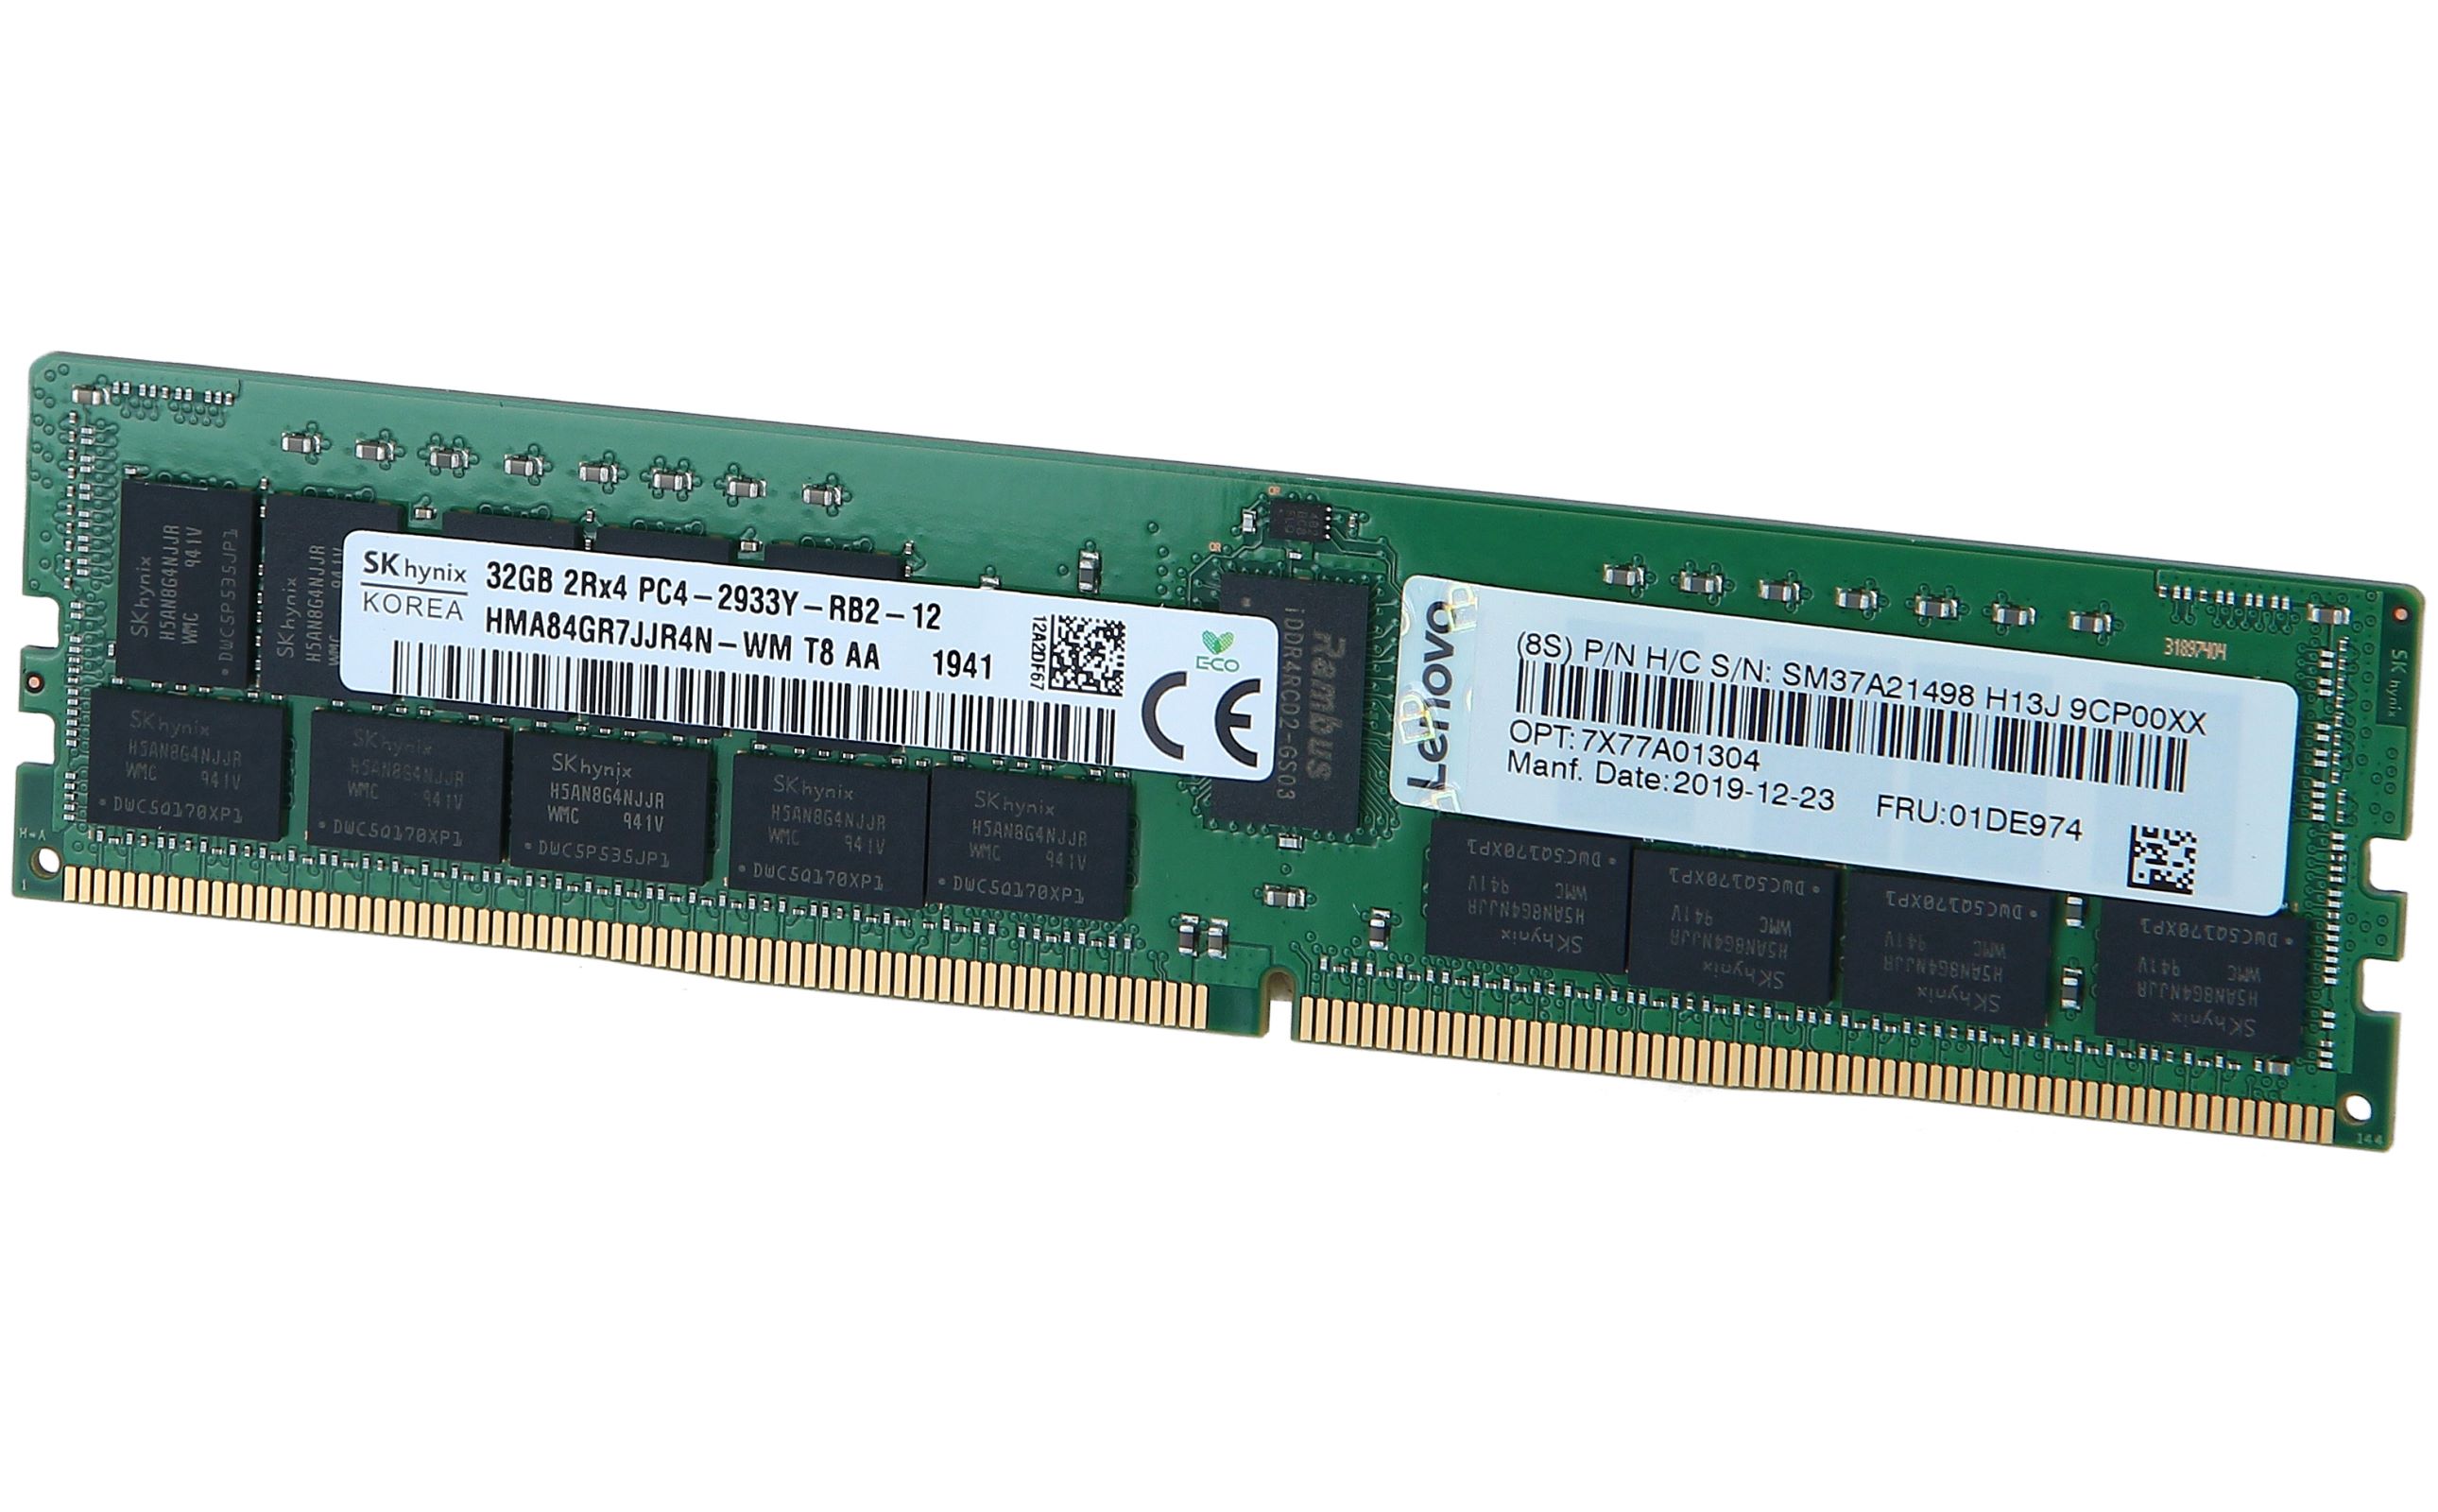 Lenovo 7X77A01304 Lenovo TruDDR4 DDR4 32 GB DIMM 288-PIN new and  refurbished buy online low prices